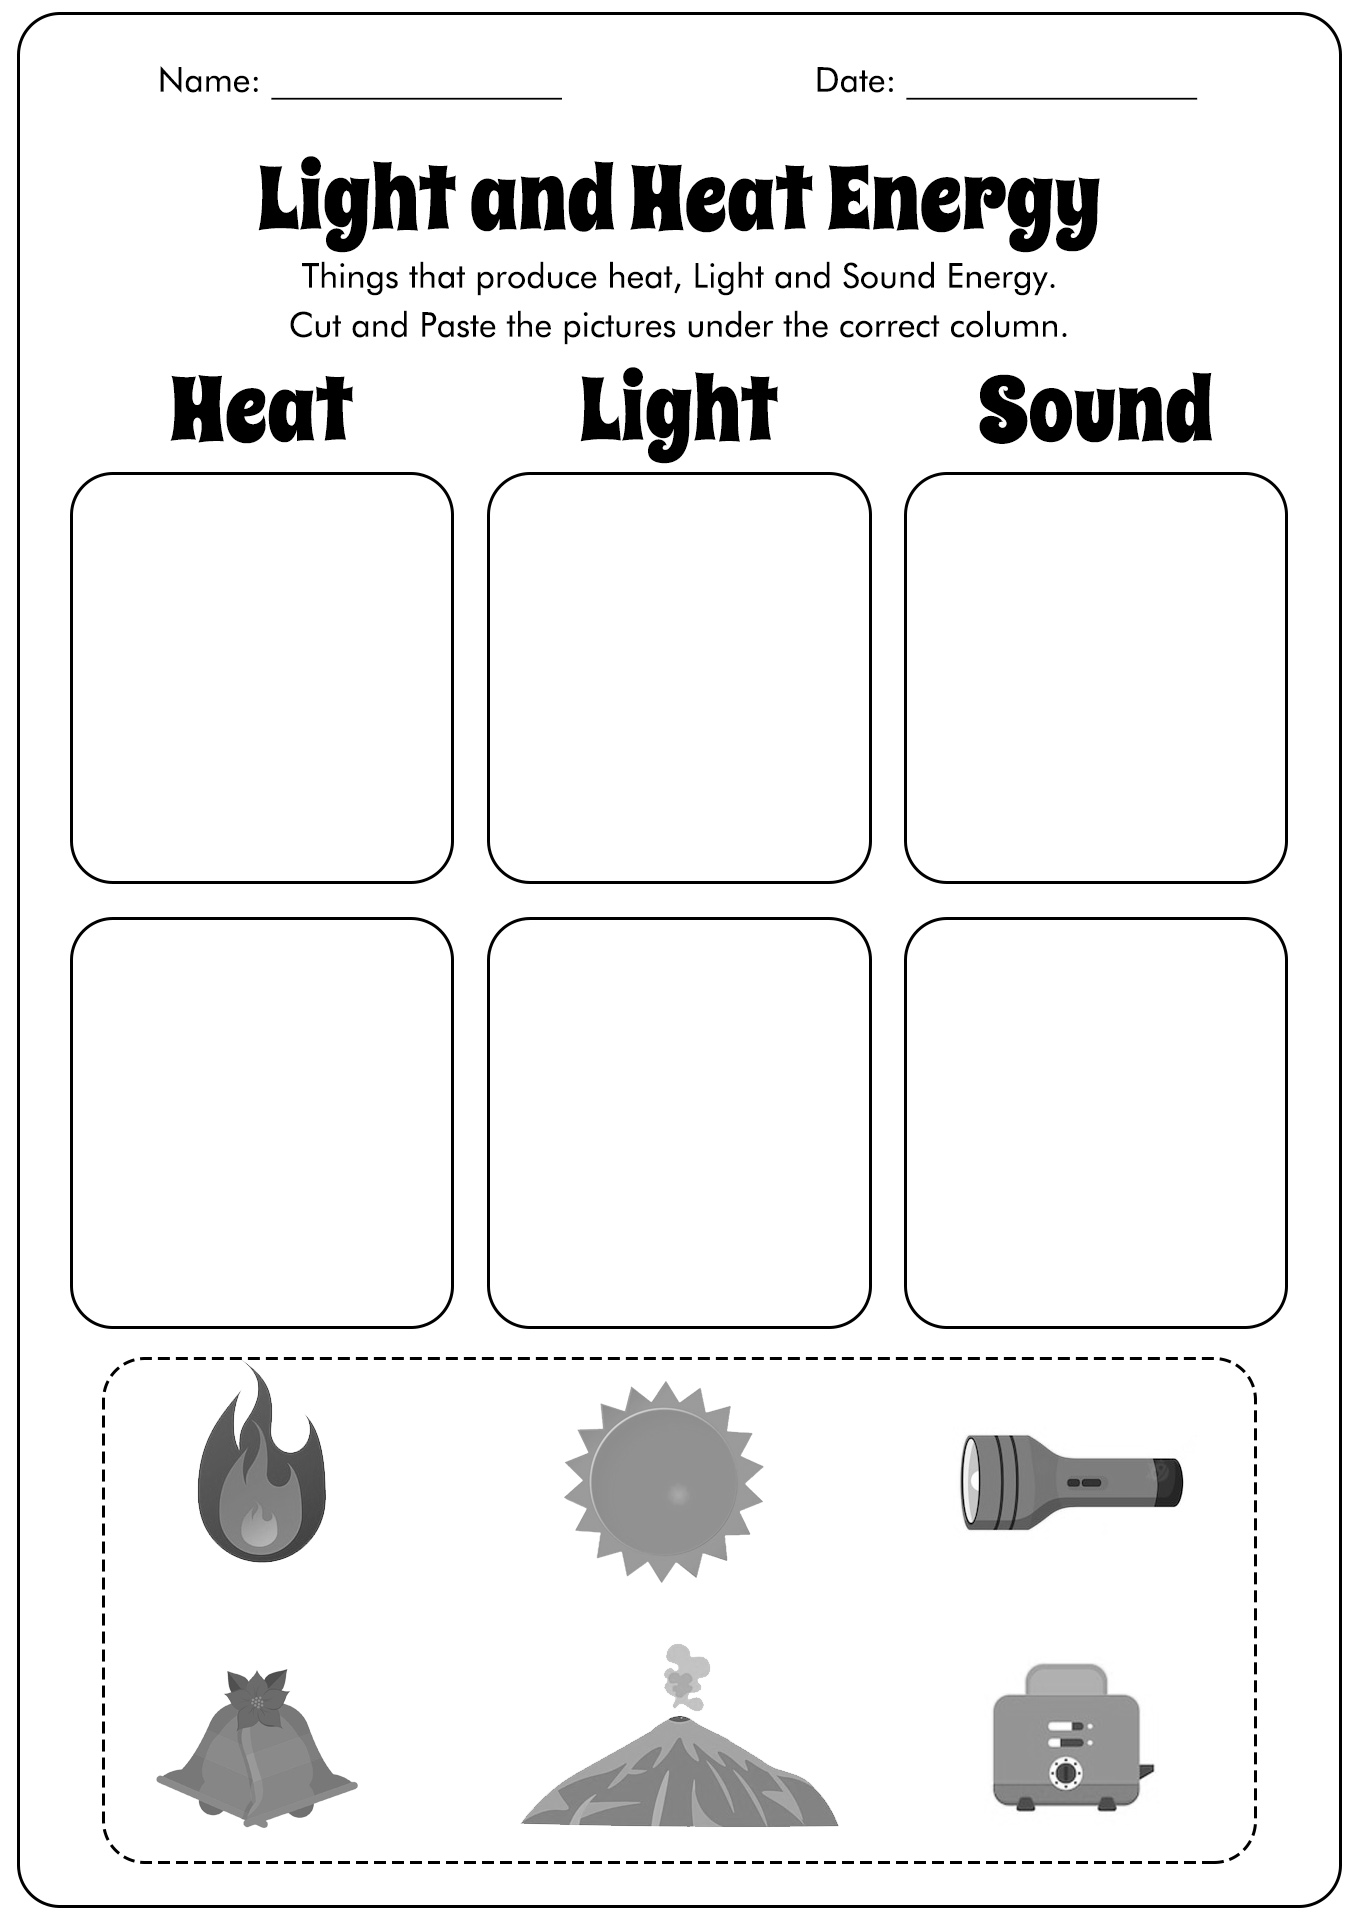 Light and Heat Energy Worksheets